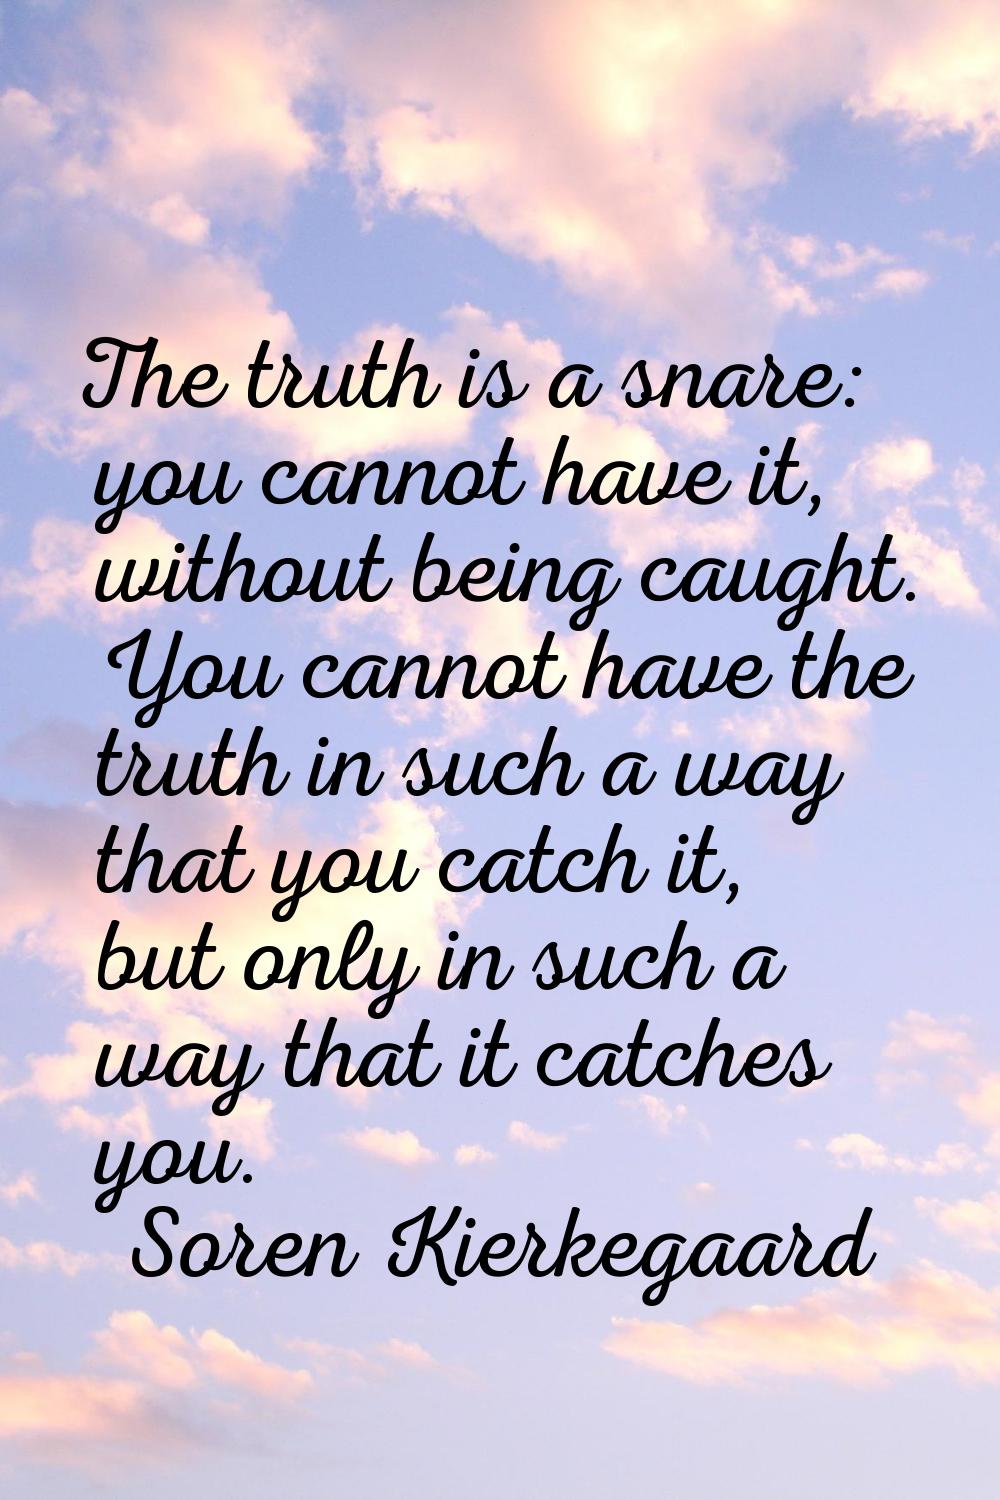 The truth is a snare: you cannot have it, without being caught. You cannot have the truth in such a